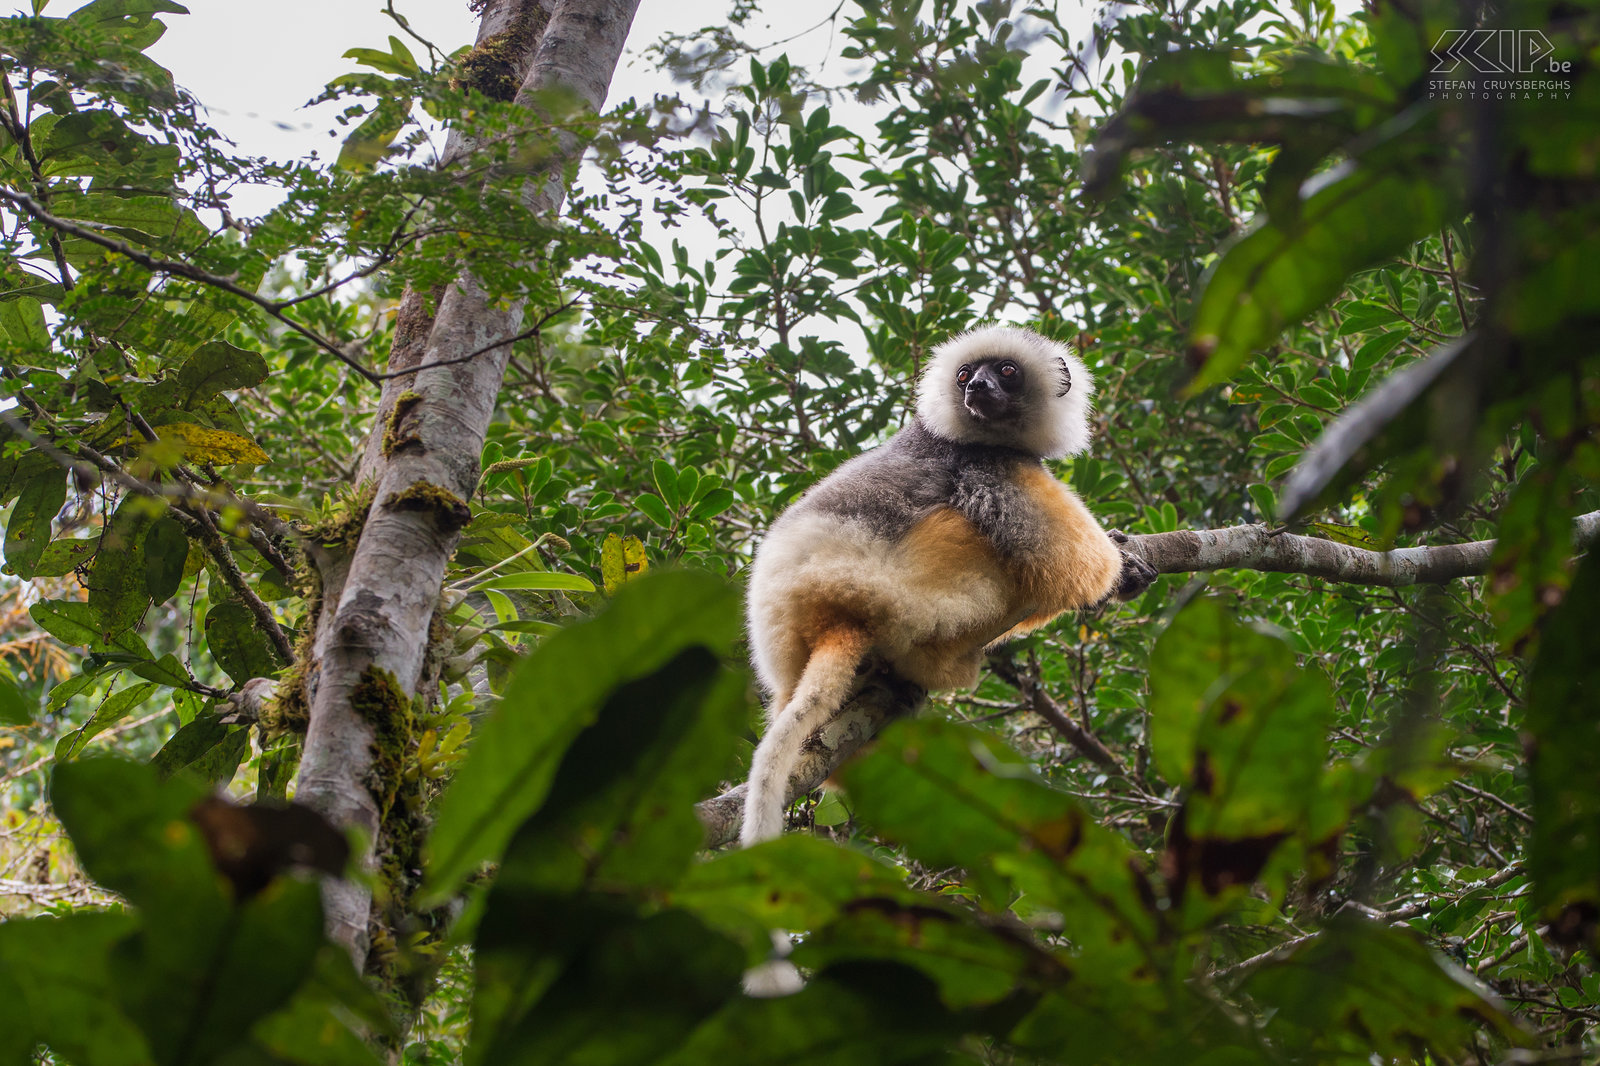 Andasibe - Diademed sifaka We also encountered a large group of beautiful diademed sifaka’s. The diademed sifaka (Propithecus diadema) is an endangered species of sifaka. They live in groups of two to ten individuals and they defend their own territory. Stefan Cruysberghs